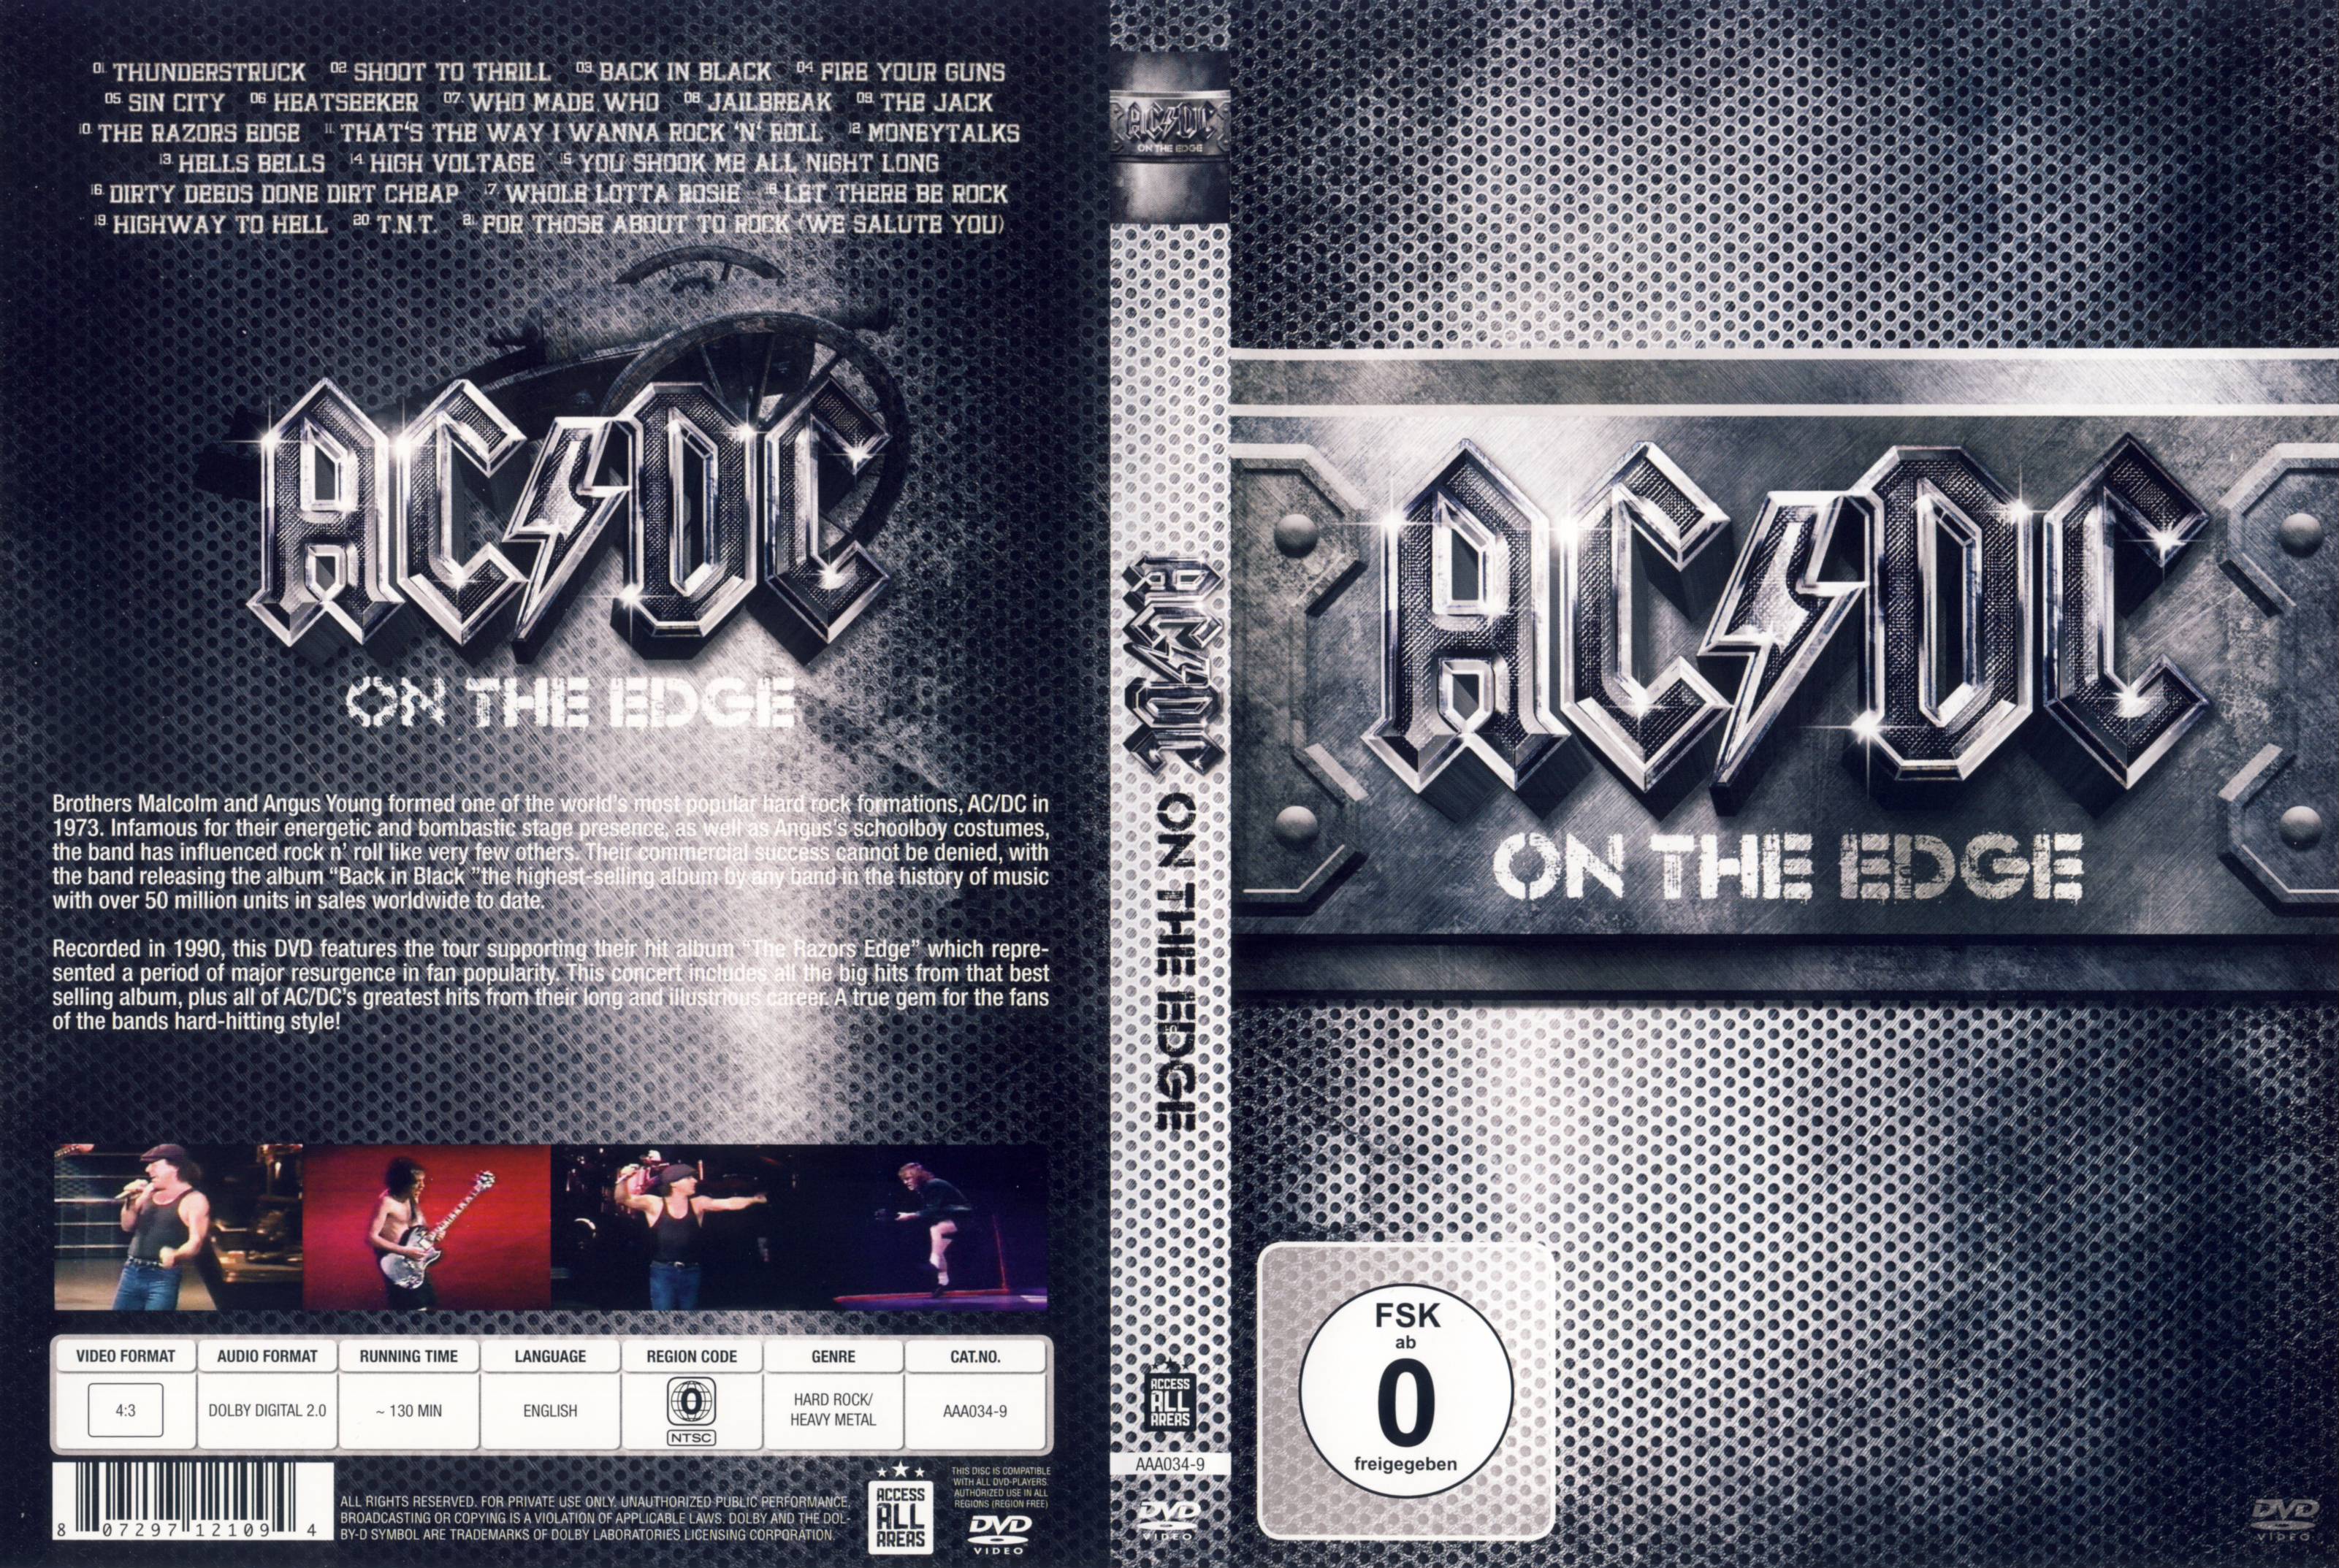 Jaquette DVD ACDC On The Edge